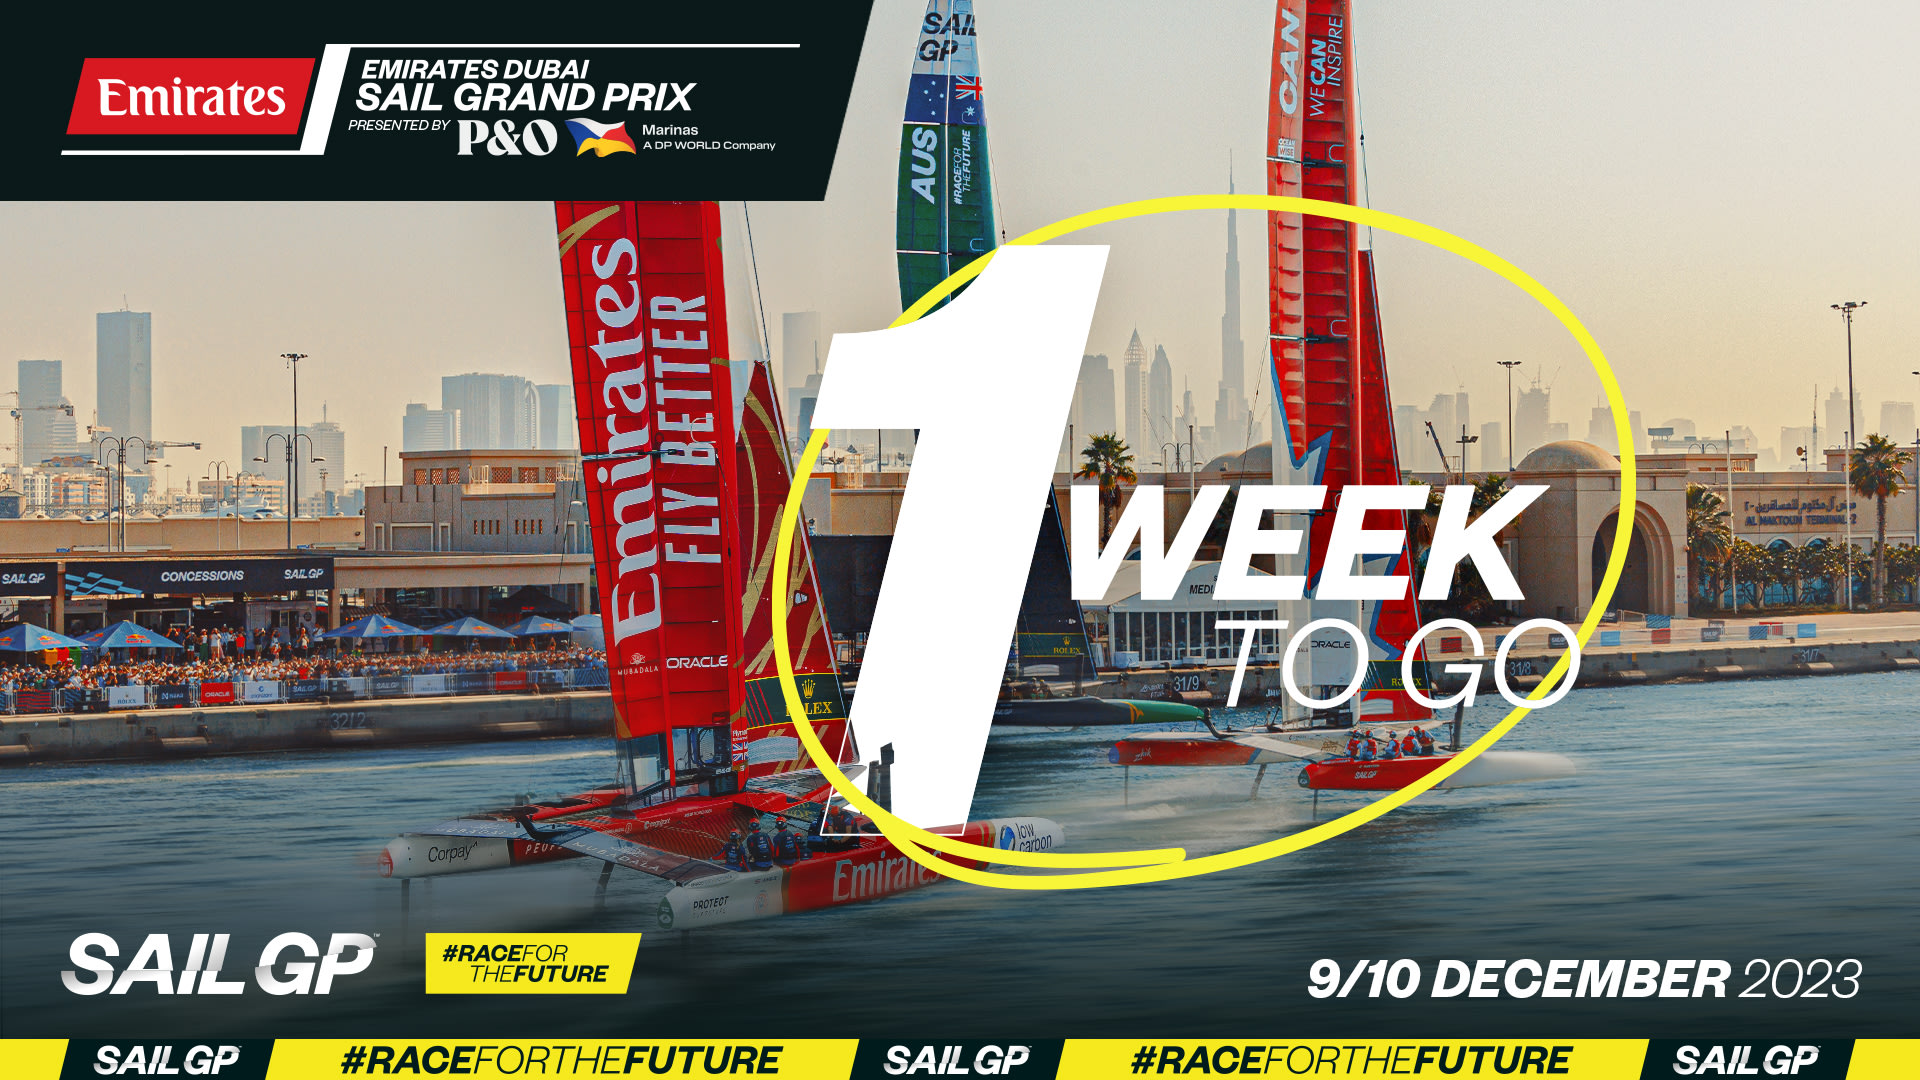 One week to go: Excitement builds for upcoming Emirates Dubai Sail Grand Prix